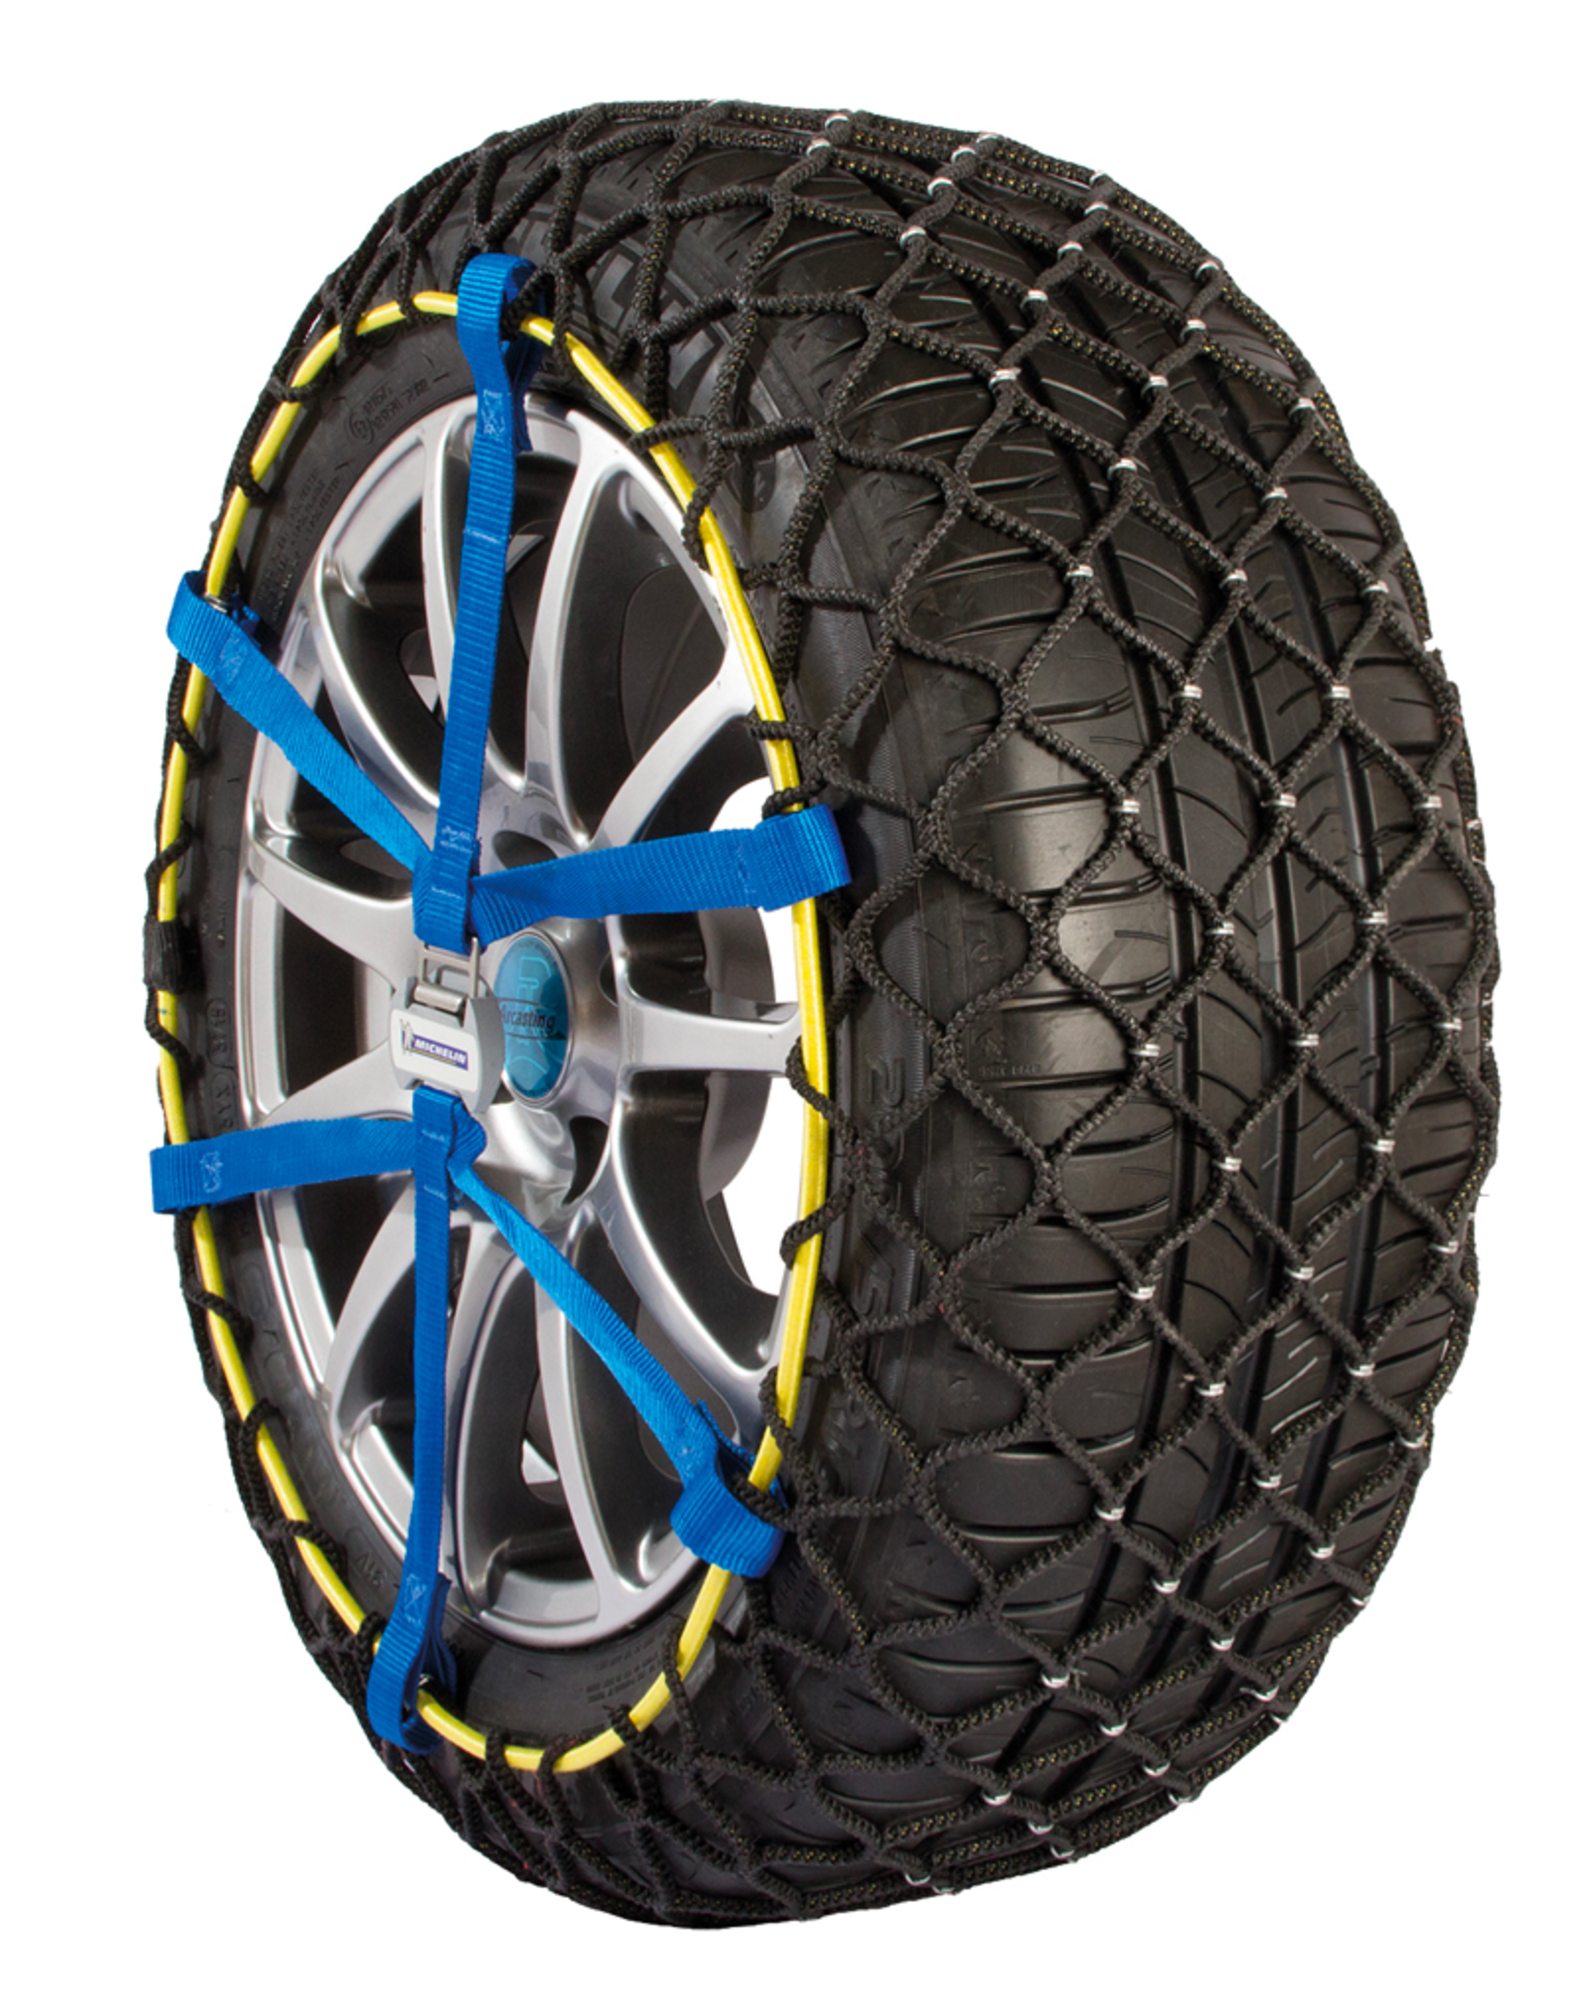 Chaines-neige Easy Grip Michelin 15"/17"